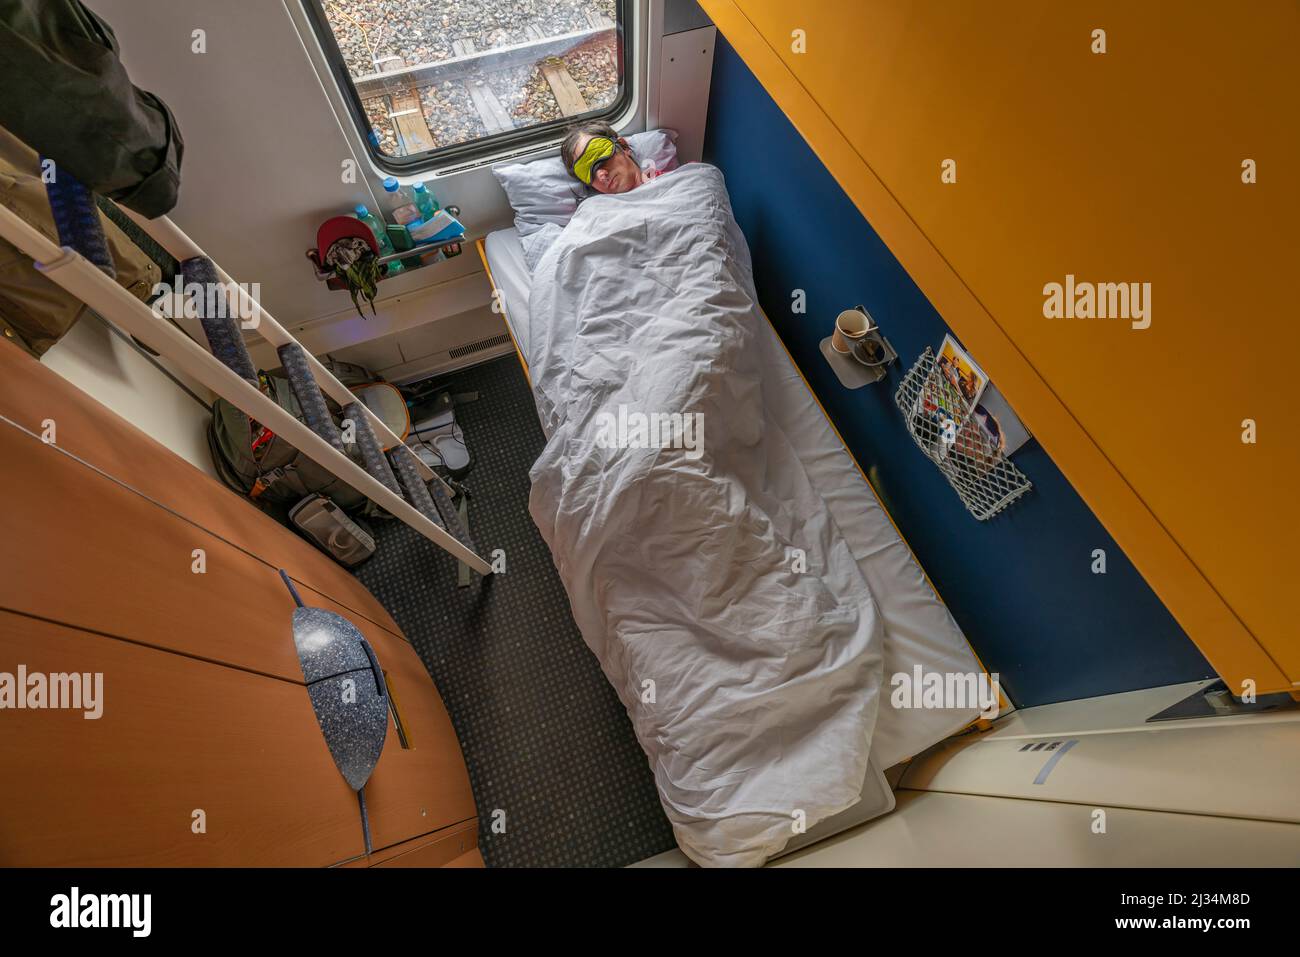 Blue and yellow interior of sleeping coach Prague Zurich with sleeping man Stock Photo